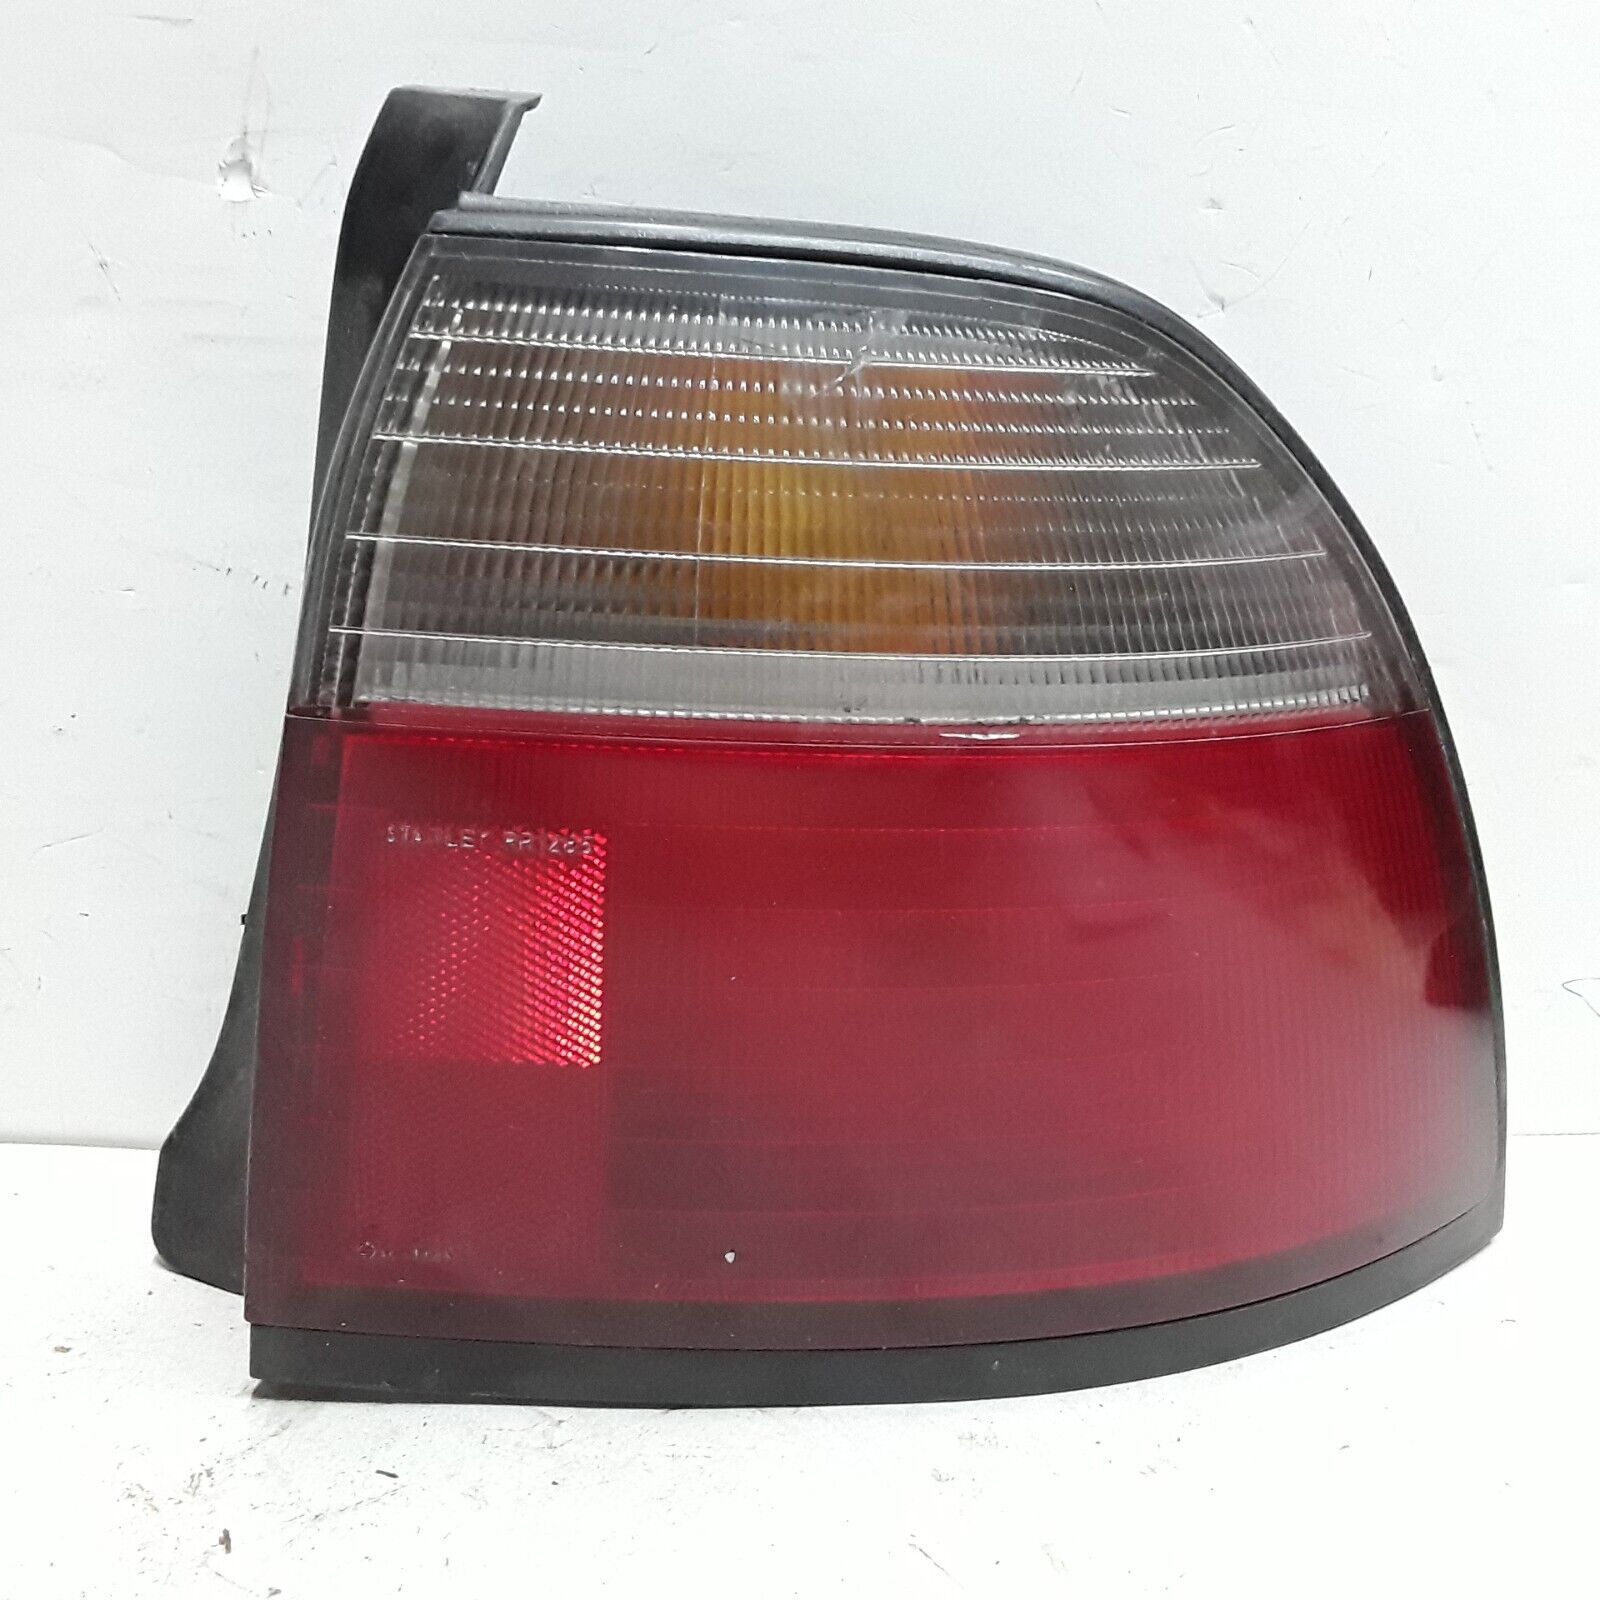 Primary image for 96 97 Honda Accord right passenger side tail light assembly OEM